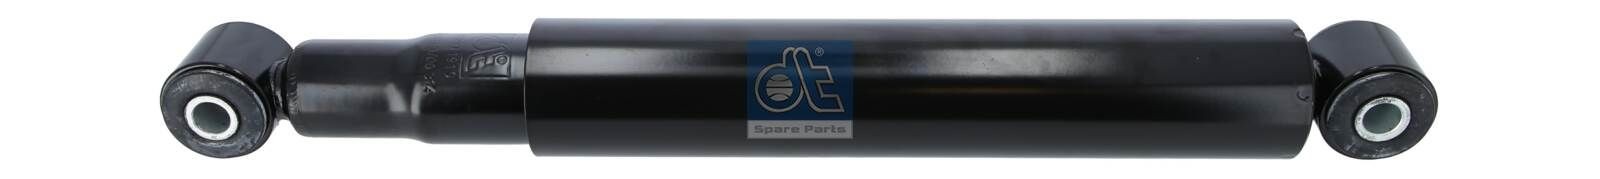 DT Spare Parts 4.61314 Shock absorber Front Axle, Oil Pressure, Telescopic Shock Absorber, Top eye, Bottom eye